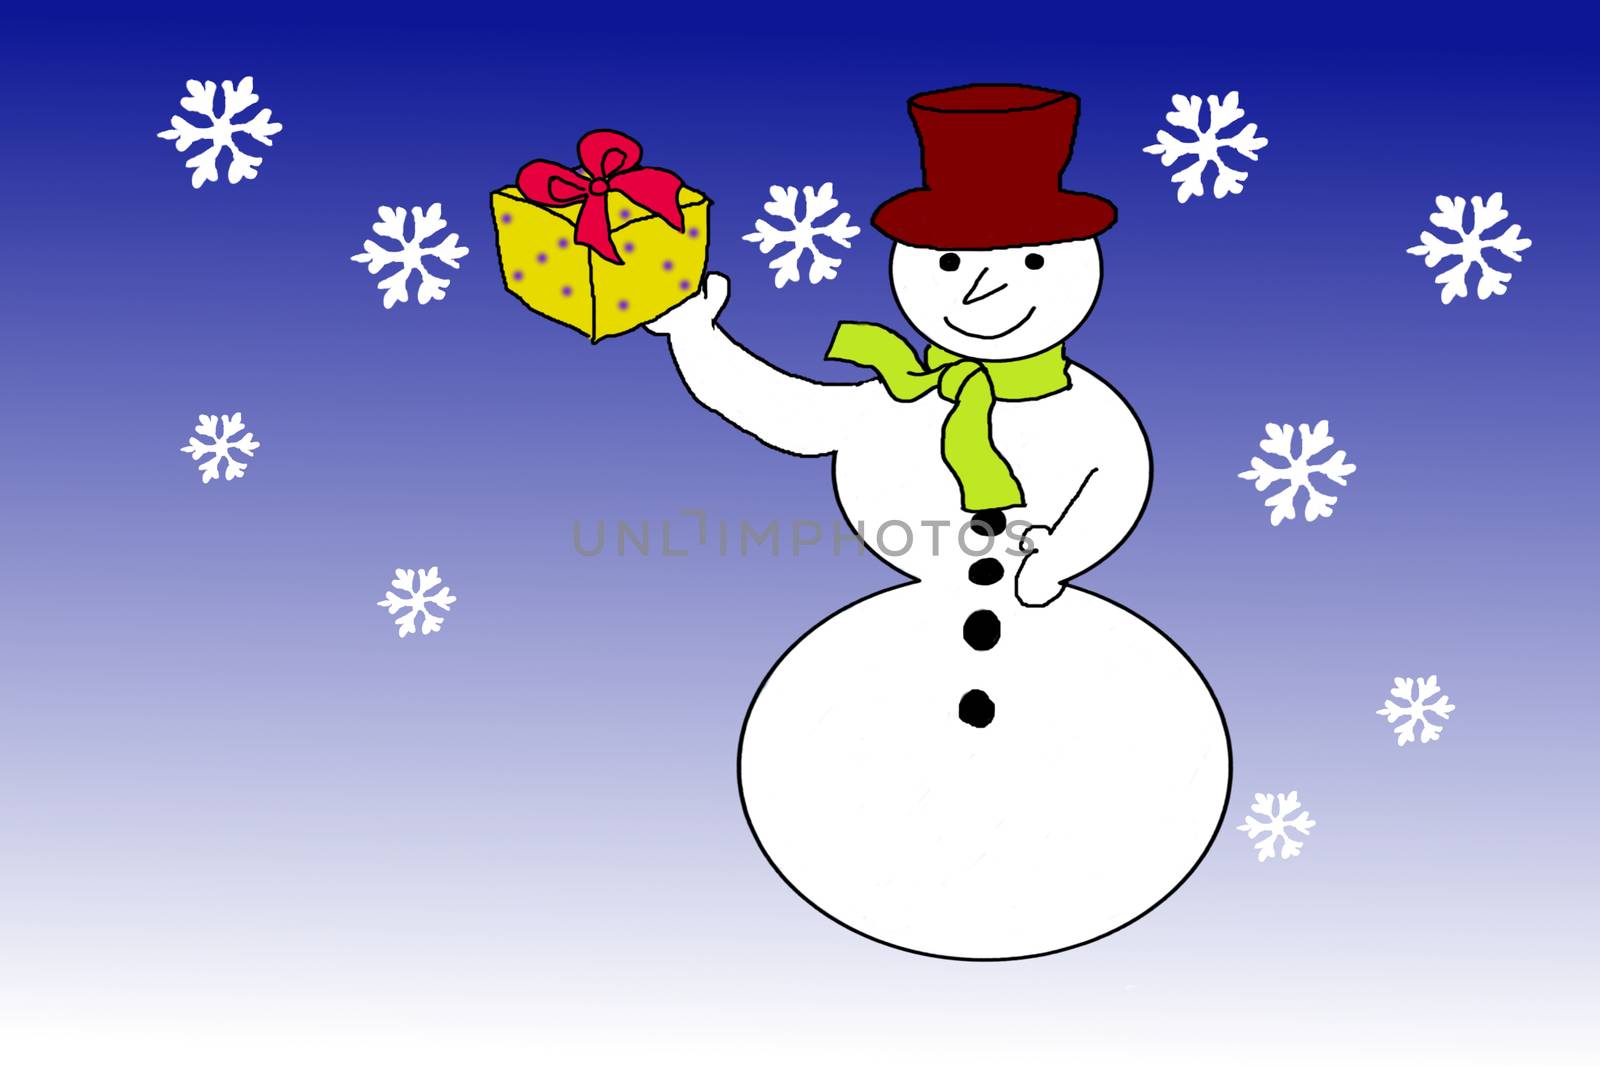 Snowman with Christmas gift by gwolters